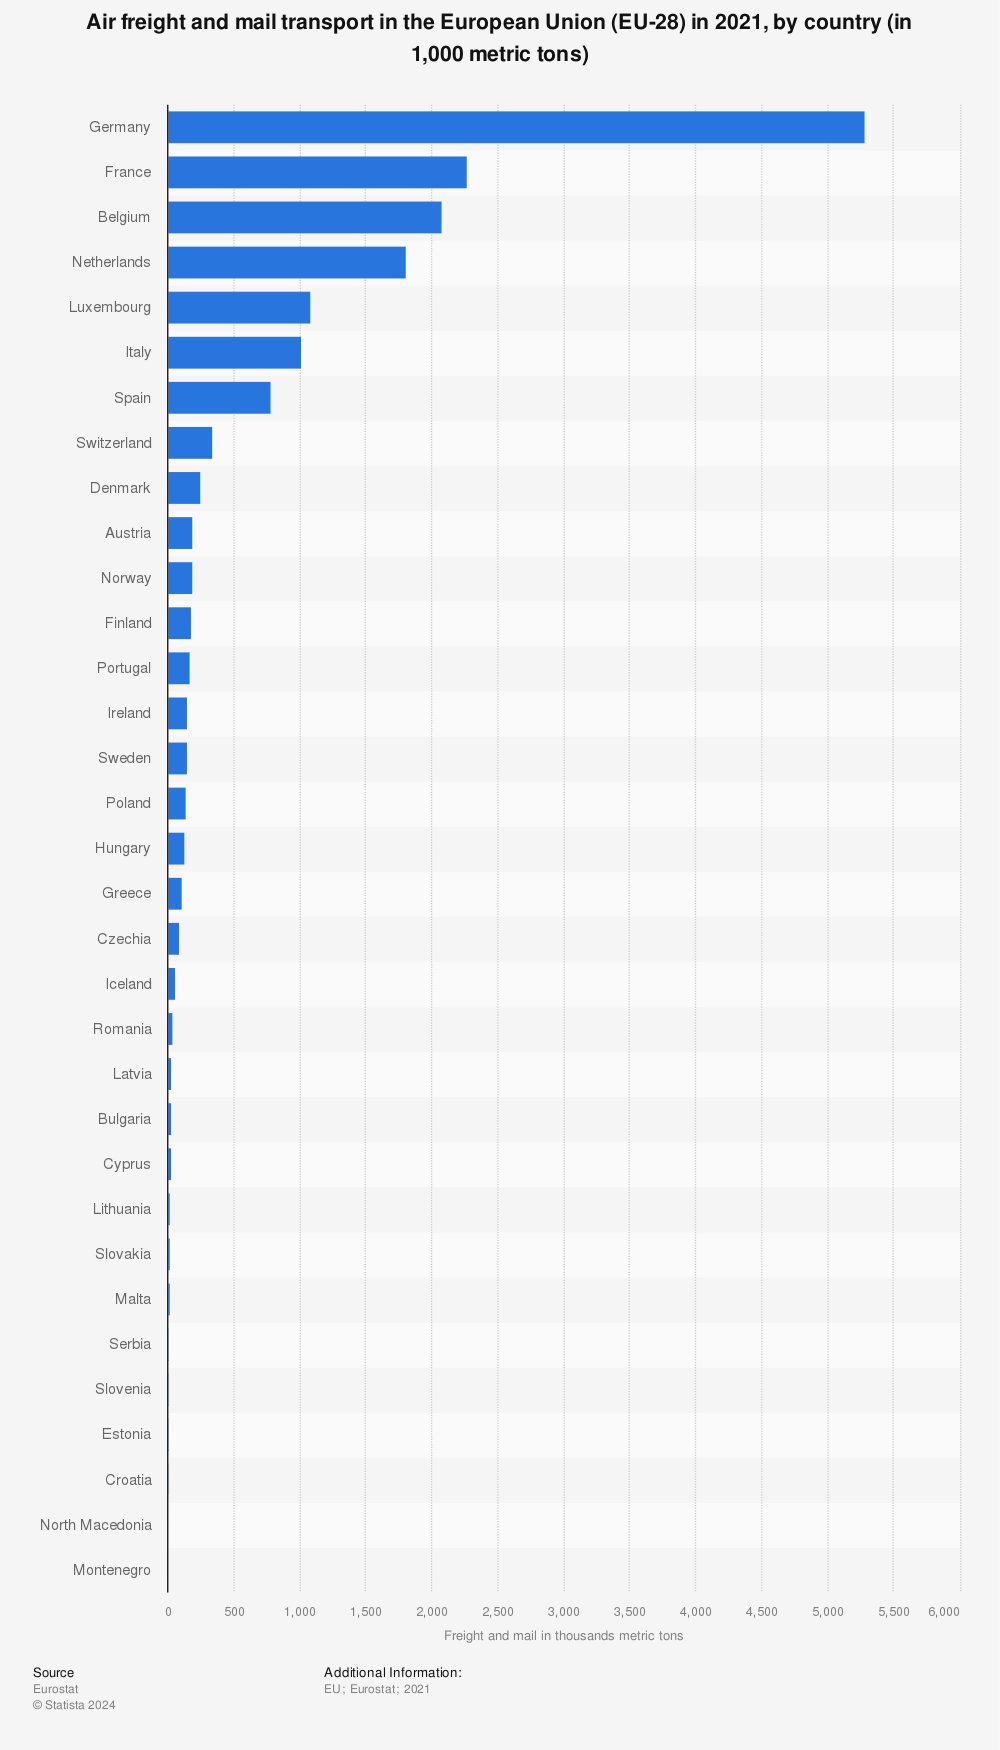 Statistic: Air freight and mail transport in the European Union (EU-28) in 2019, by country (in 1,000 metric tons) | Statista